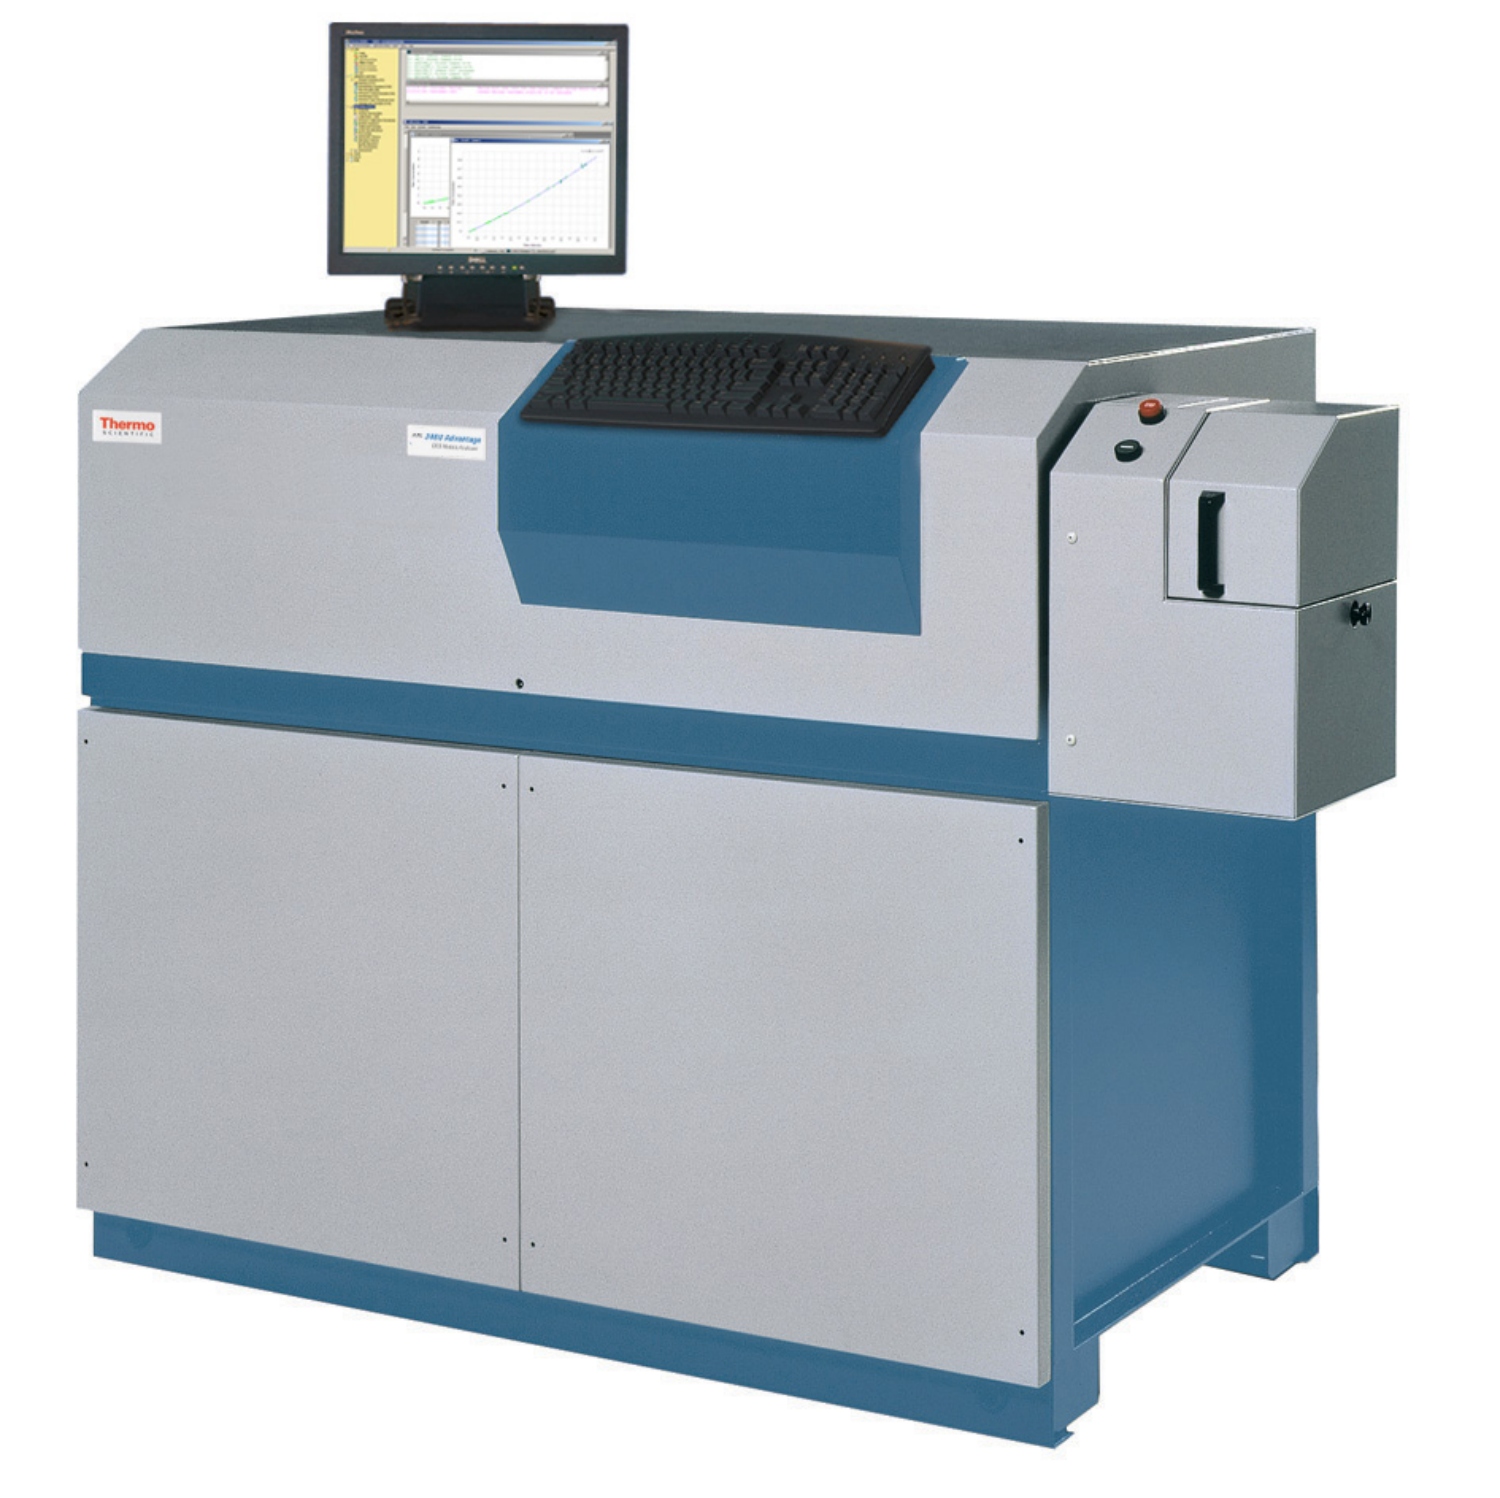 Thermo Fisher Scientific - Metals Analyzer for Reliable and Cost-Effective Analyses of Cast Iron Steel and Aluminum